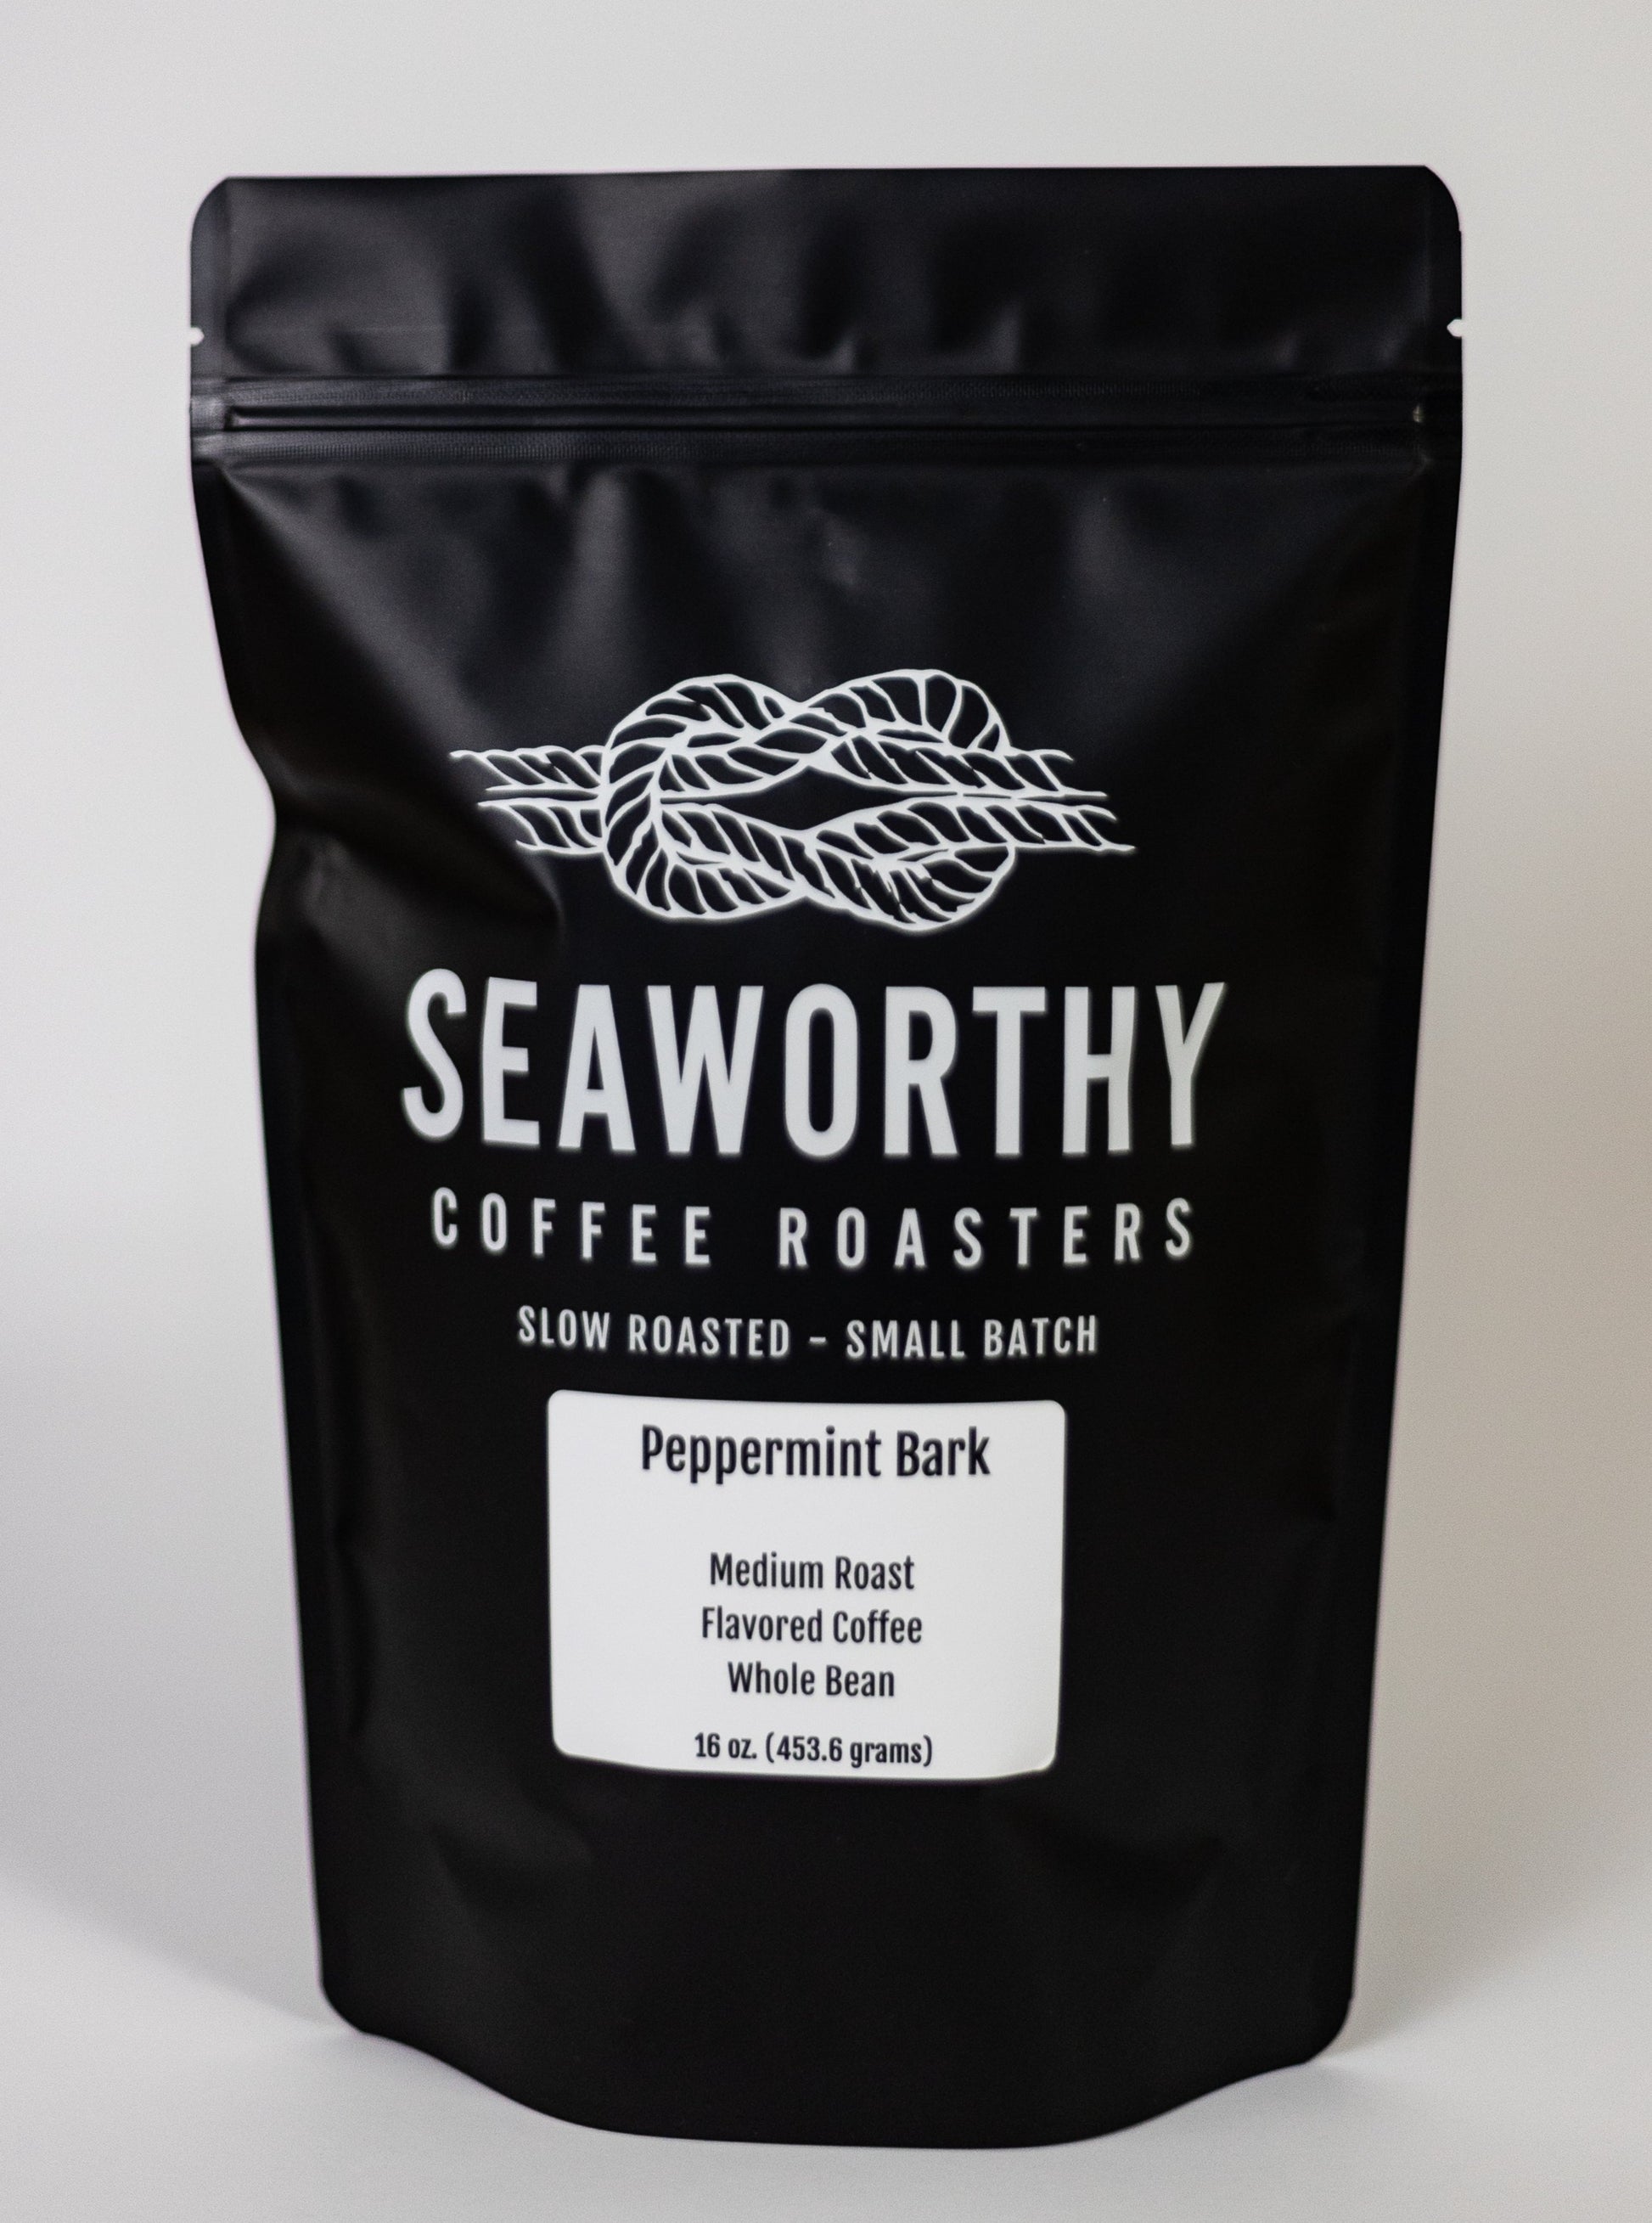 Seaworthy slow roasted, small batch coffee. This winter flavor is true to its name, bringing the minty, chocolatey experience we all know and love to your mugs. Might we even suggest topping yours with some whipped cream for an extra treat?